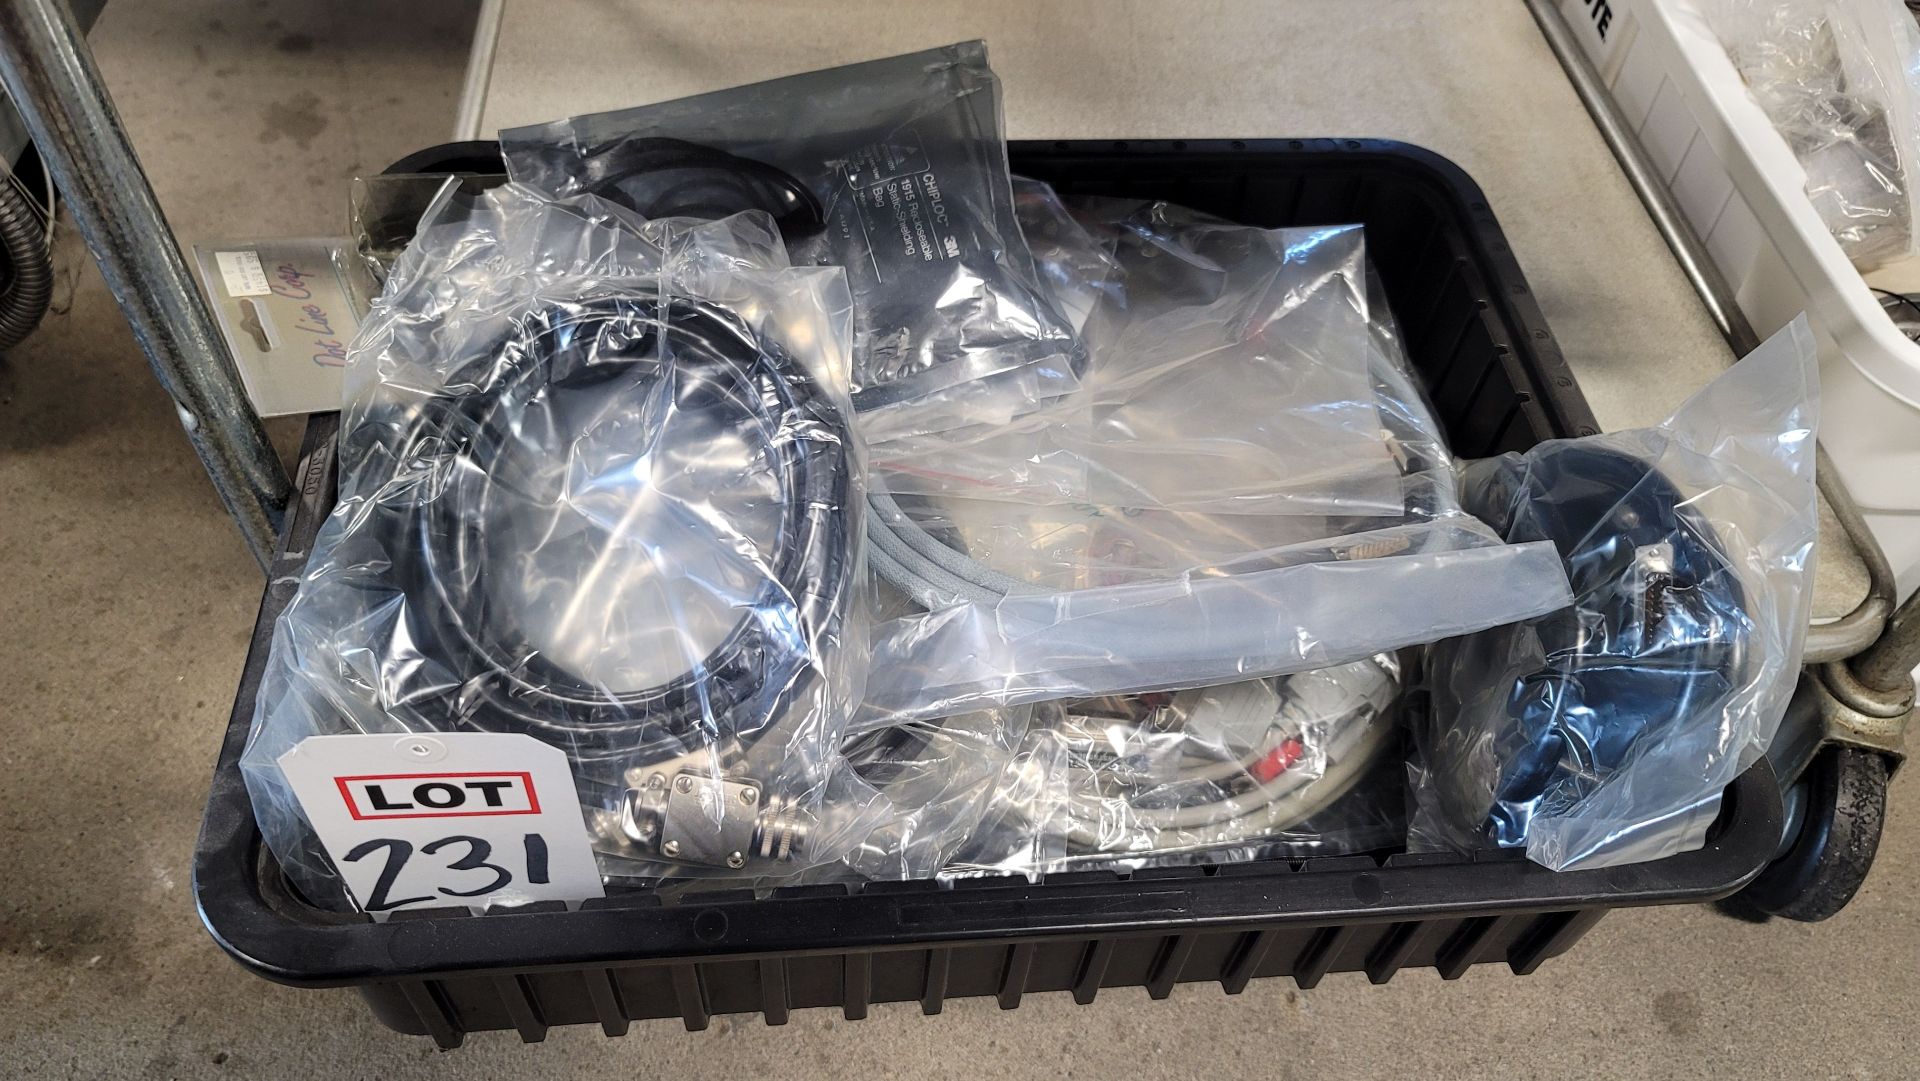 LOT - TUB OF NEW POWER CORDS AND LEADS